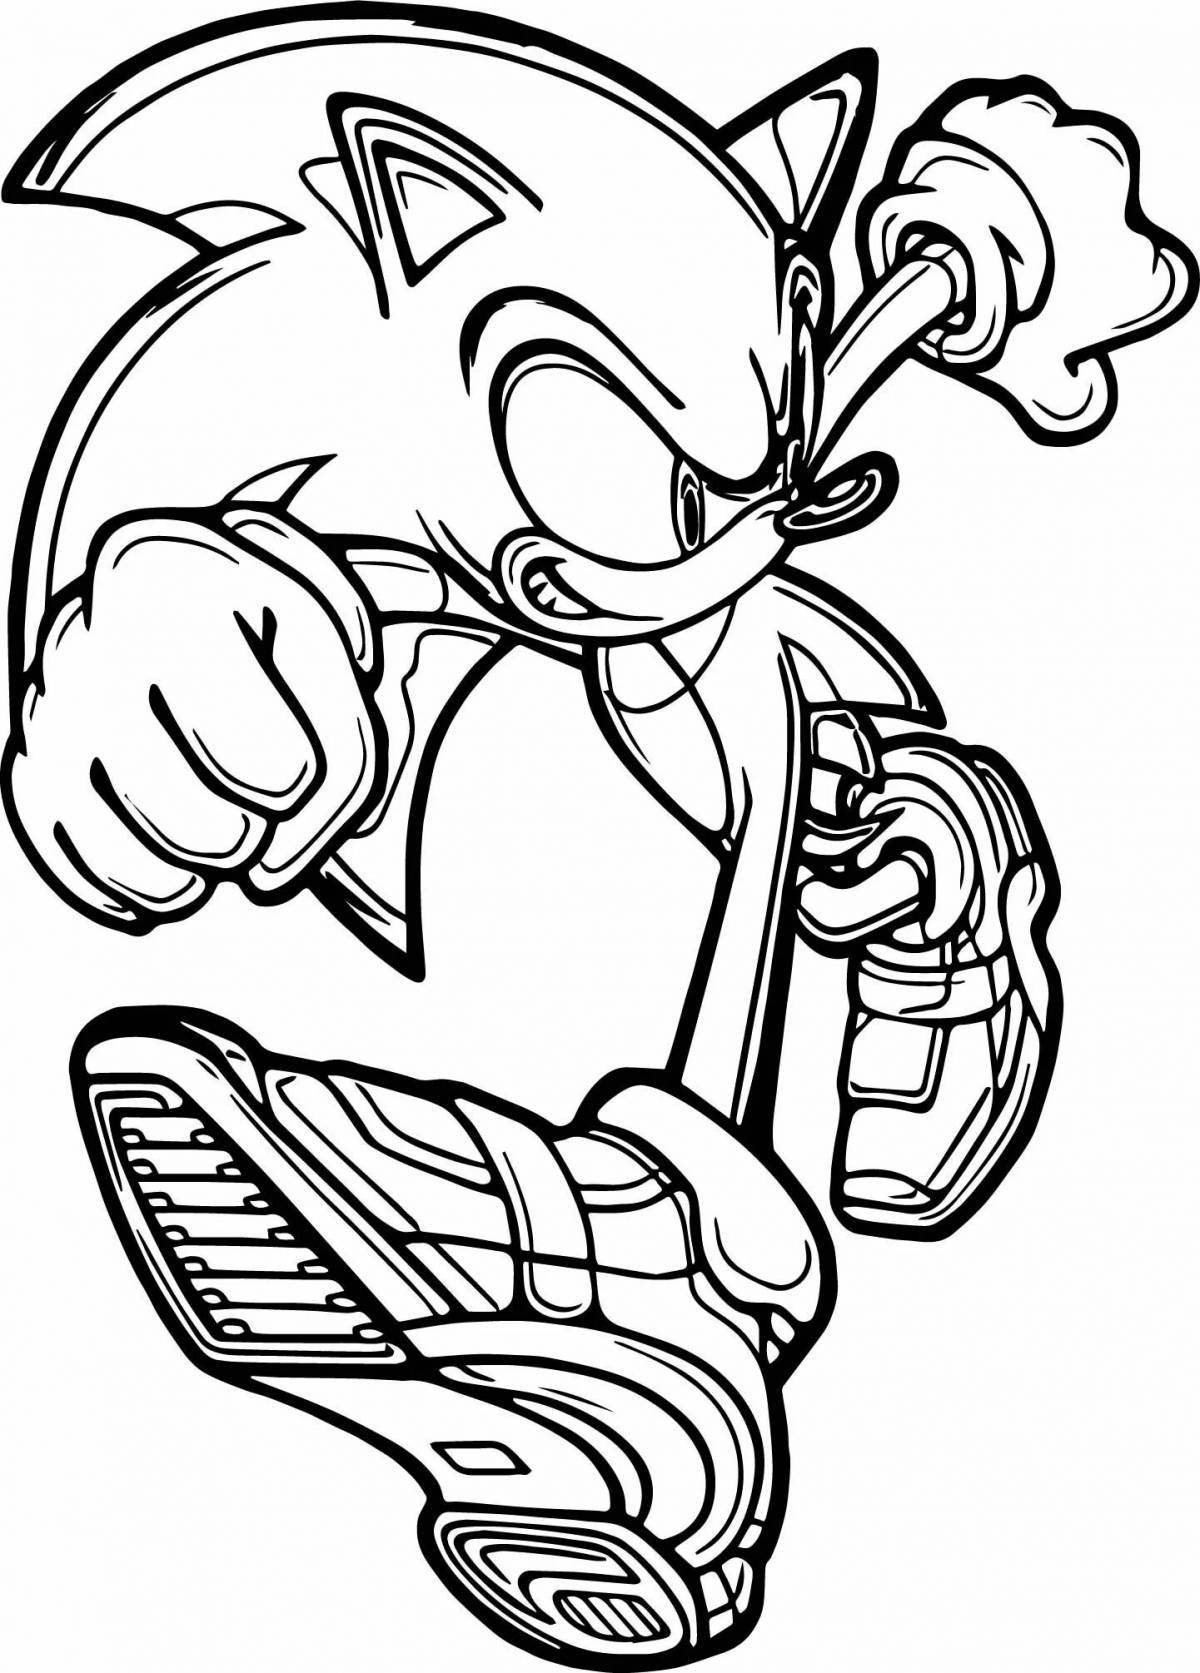 Fancy sonic iron coloring